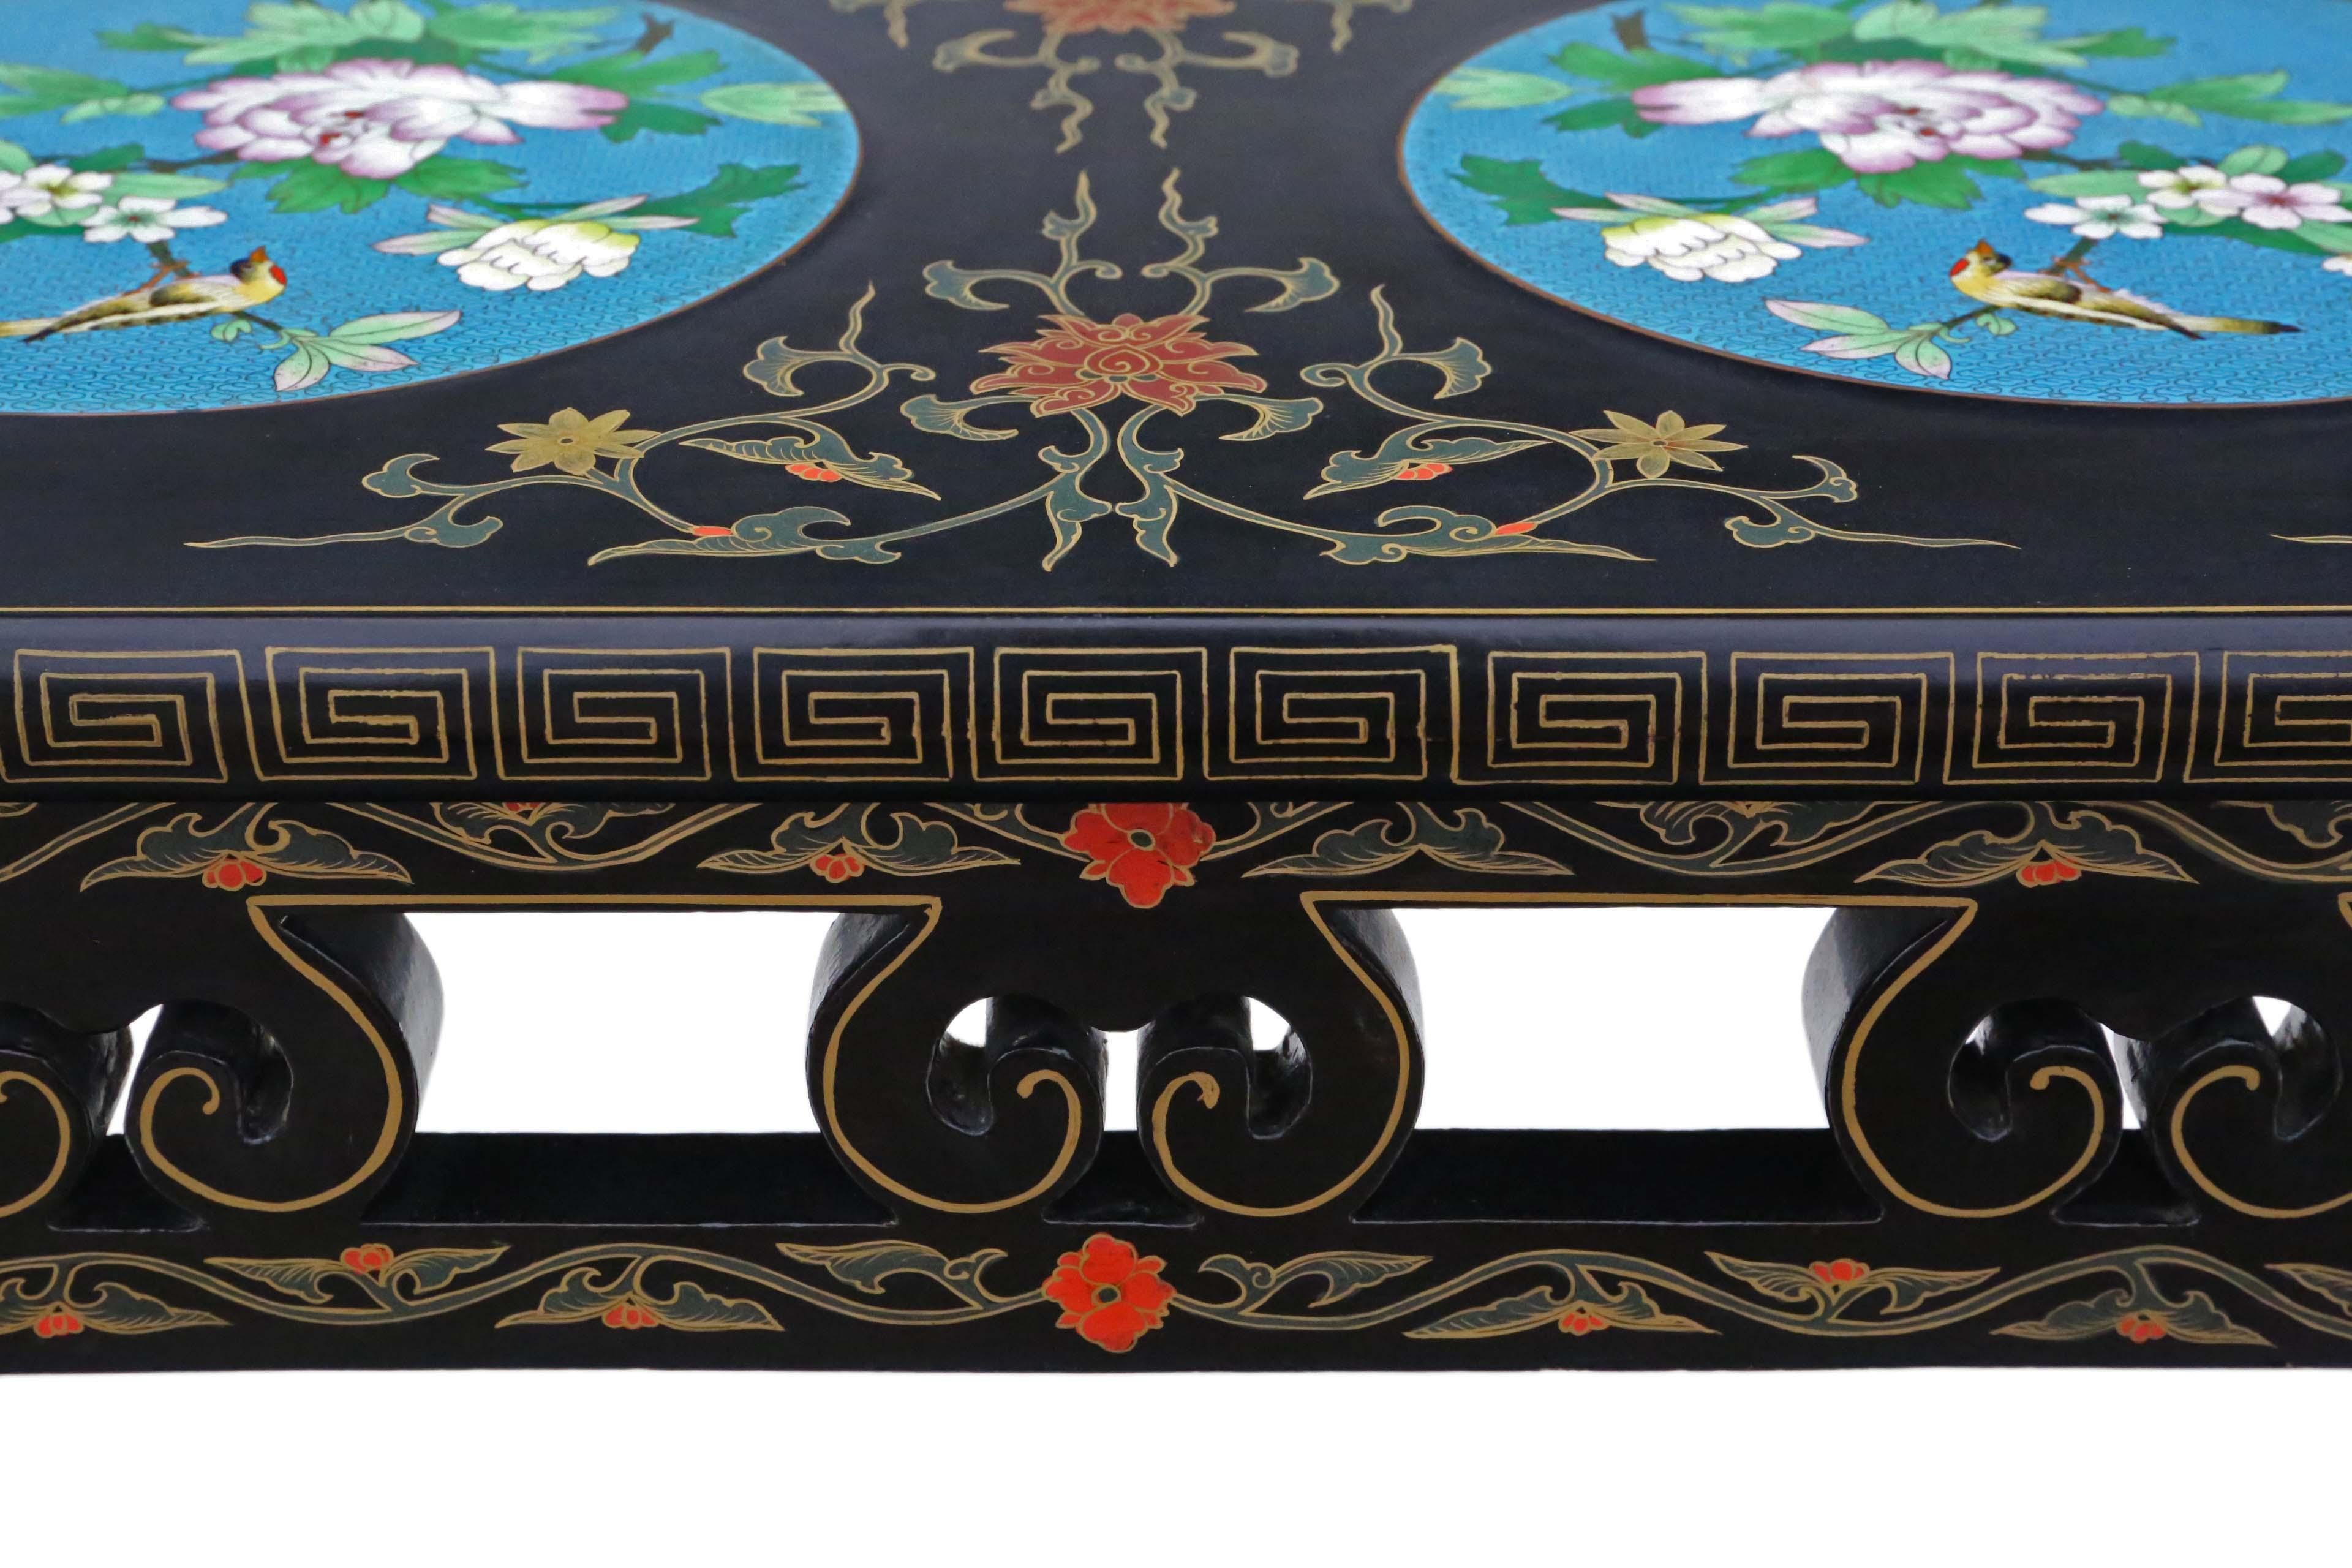 Retro Fine Quality Chinoiserie Chinese Decorated Black Lacquer Coffee Table In Good Condition For Sale In Wisbech, Cambridgeshire